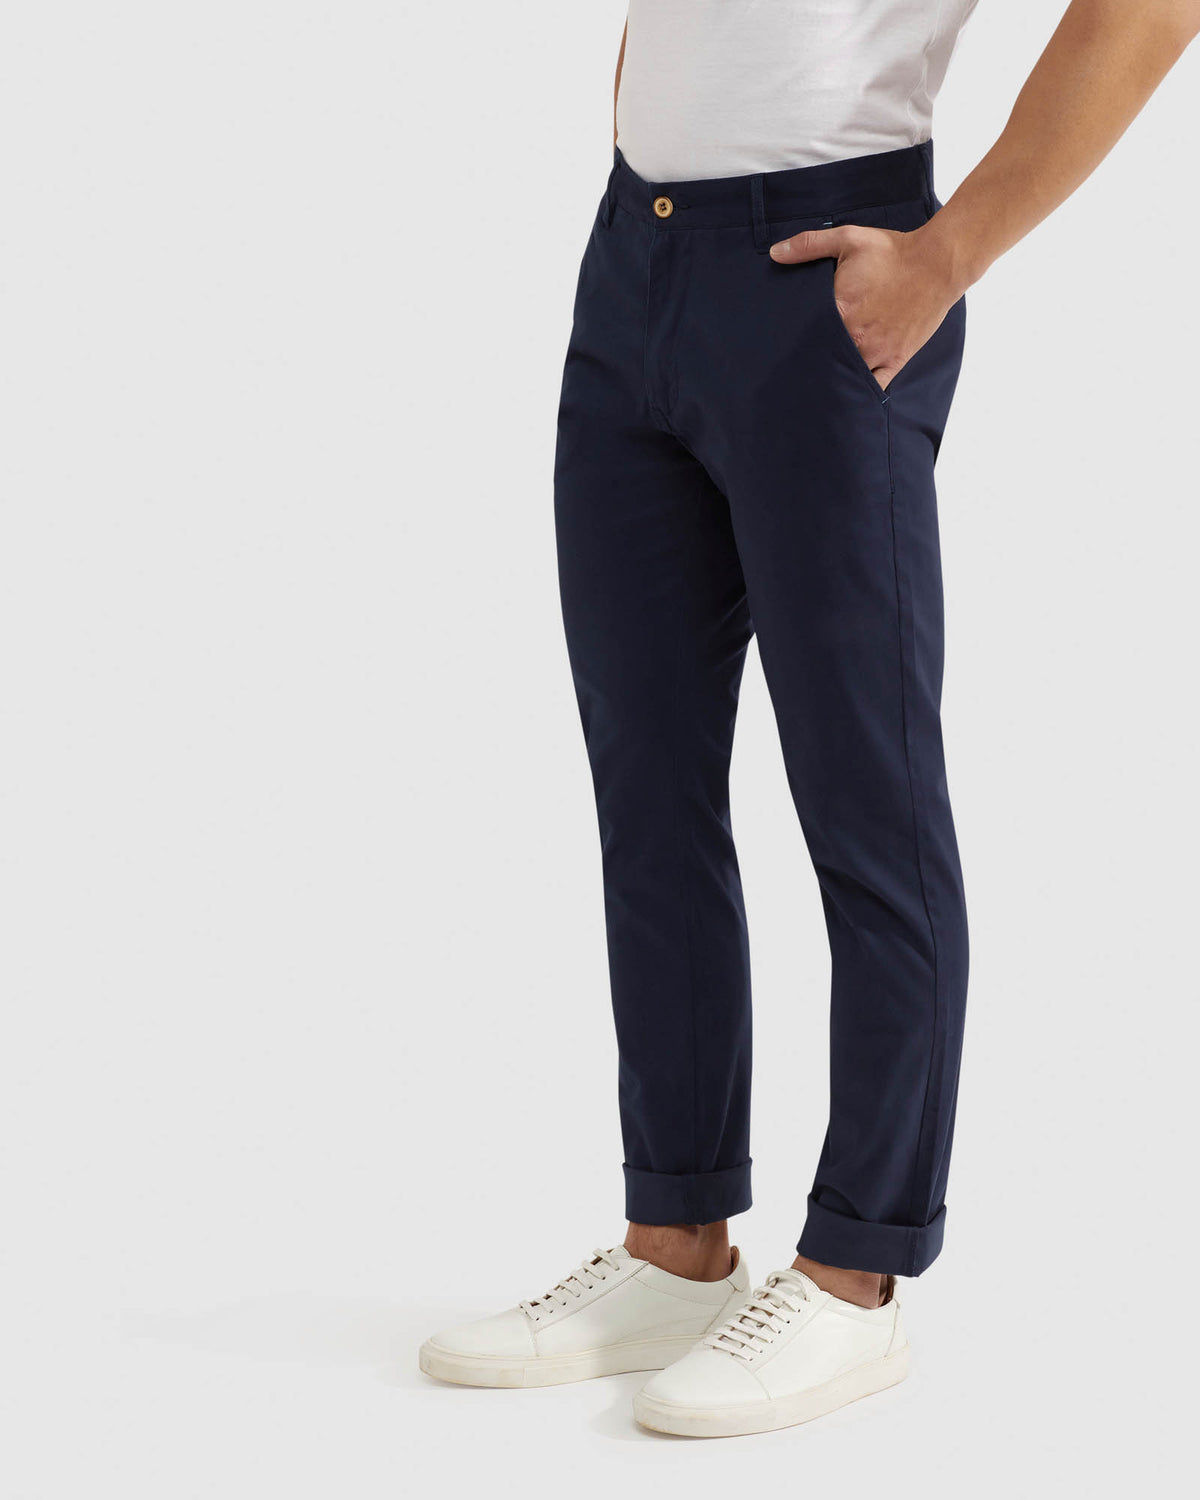 STRETCH SKINNY FIT ORGANIC COTTON CHINOS MENS TROUSERS